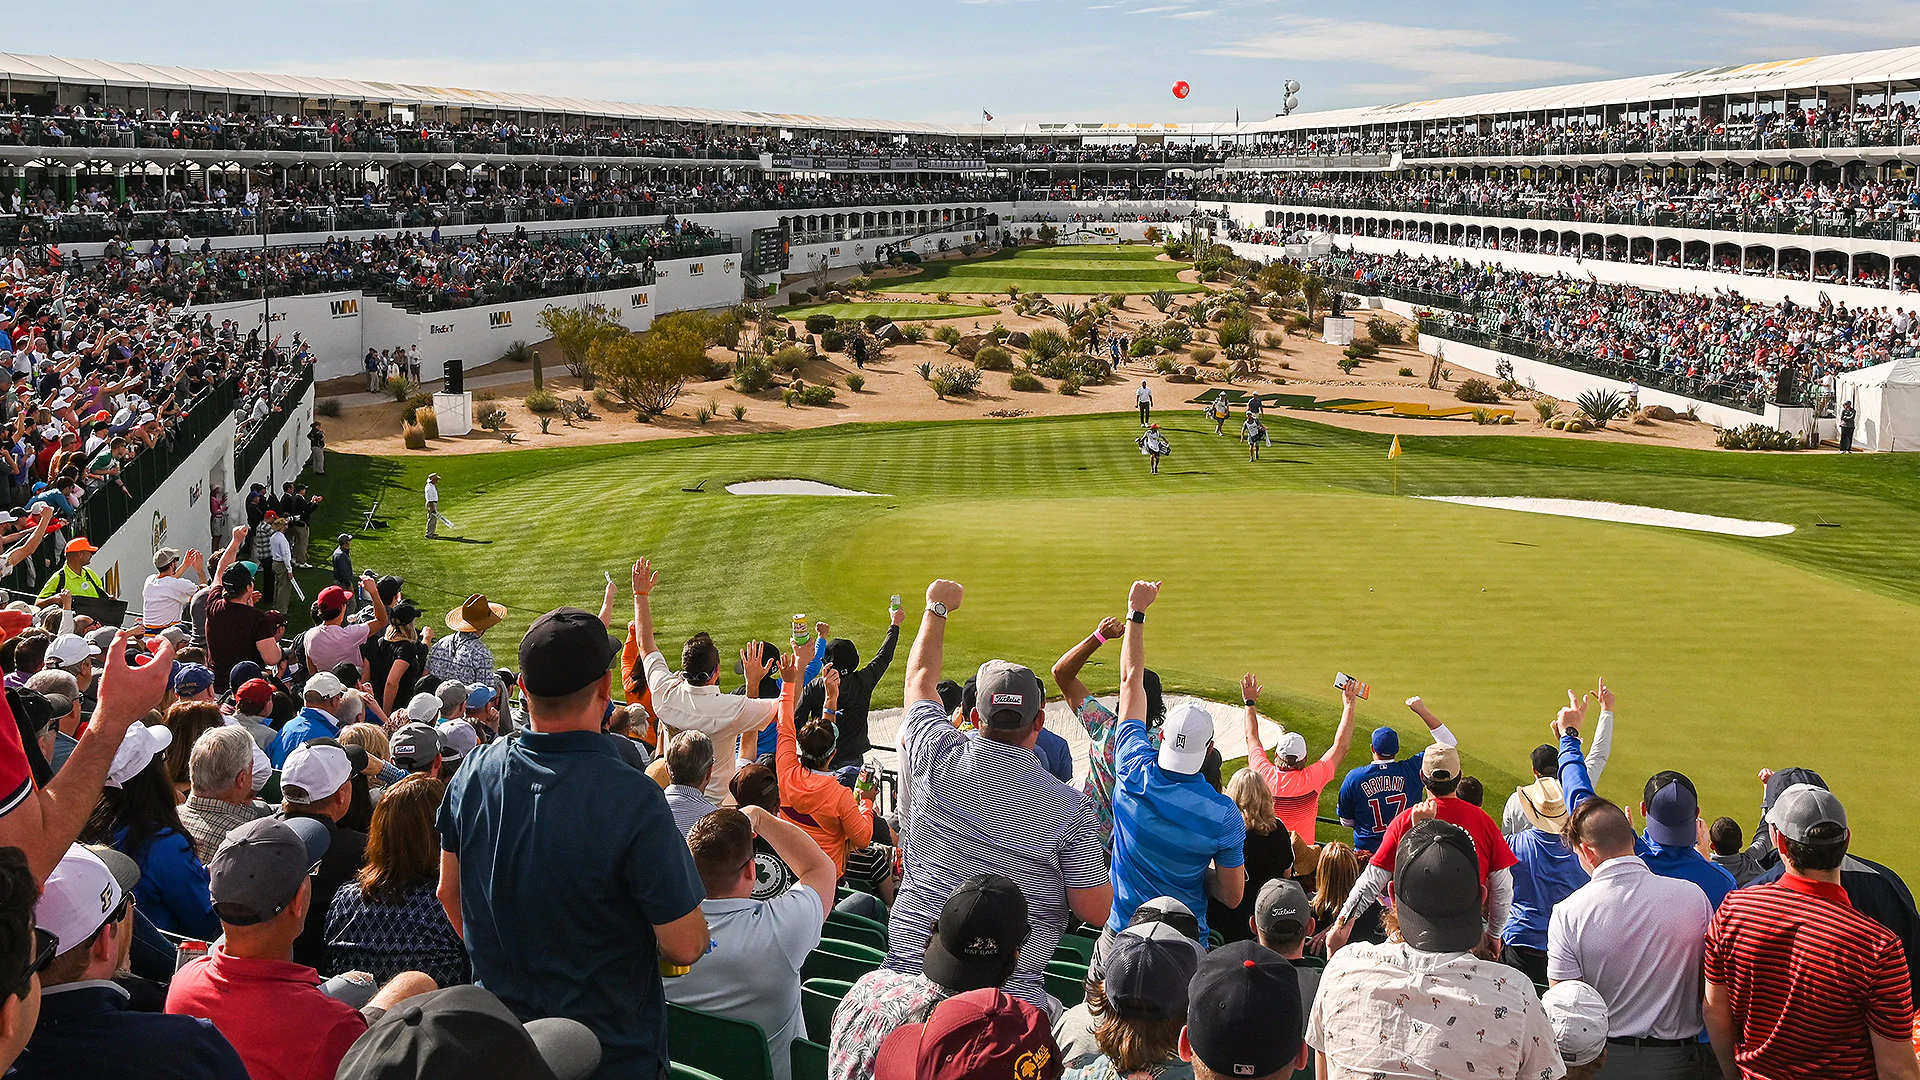 Report: Phoenix Open planning for ‘significantly scaled-back’ 16th hole